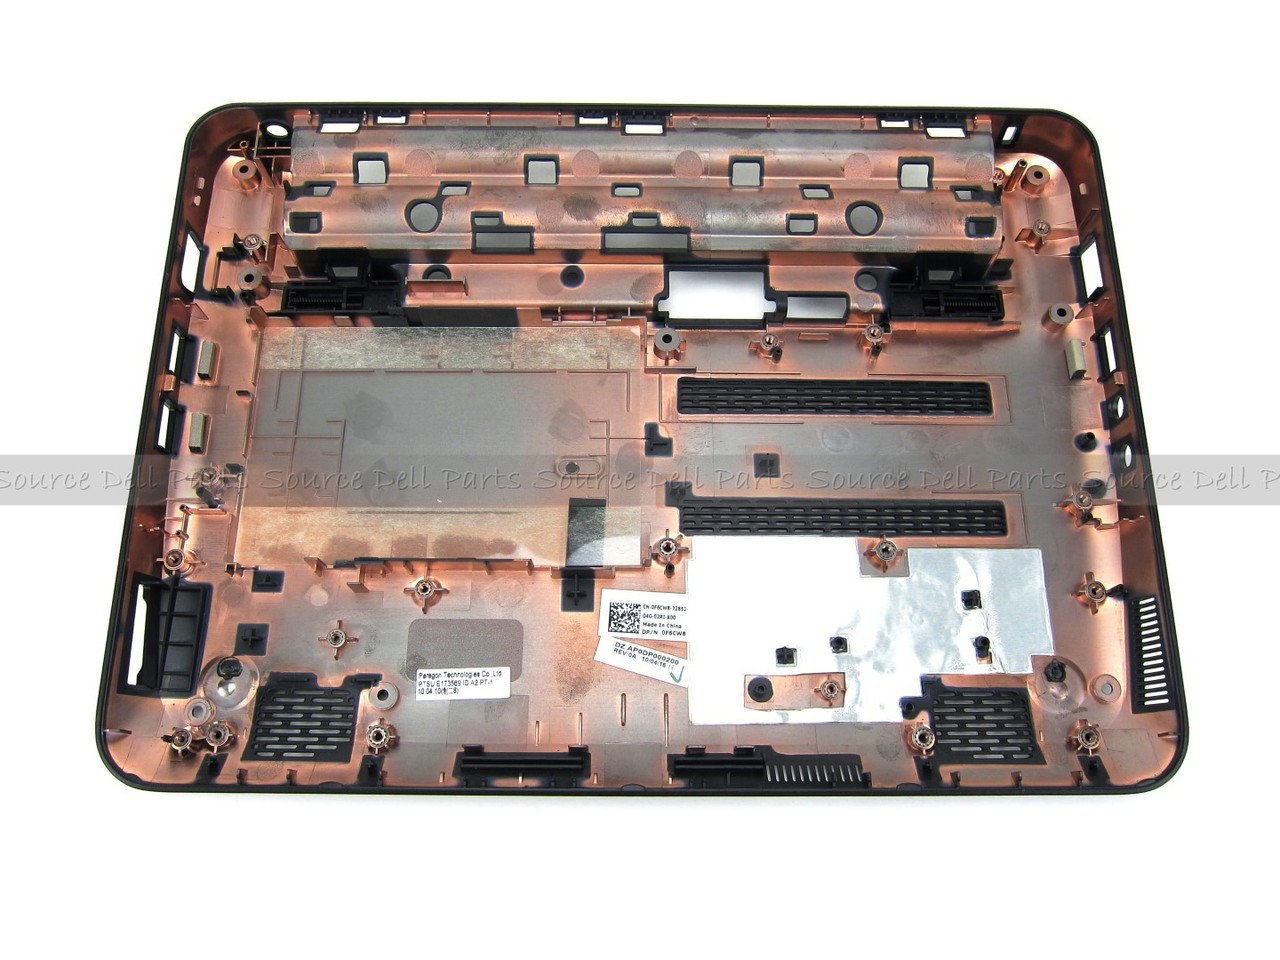 Dell Inspiron Mini 10 1012 Laptop Base Bottom Cover Assembly - F6CW8